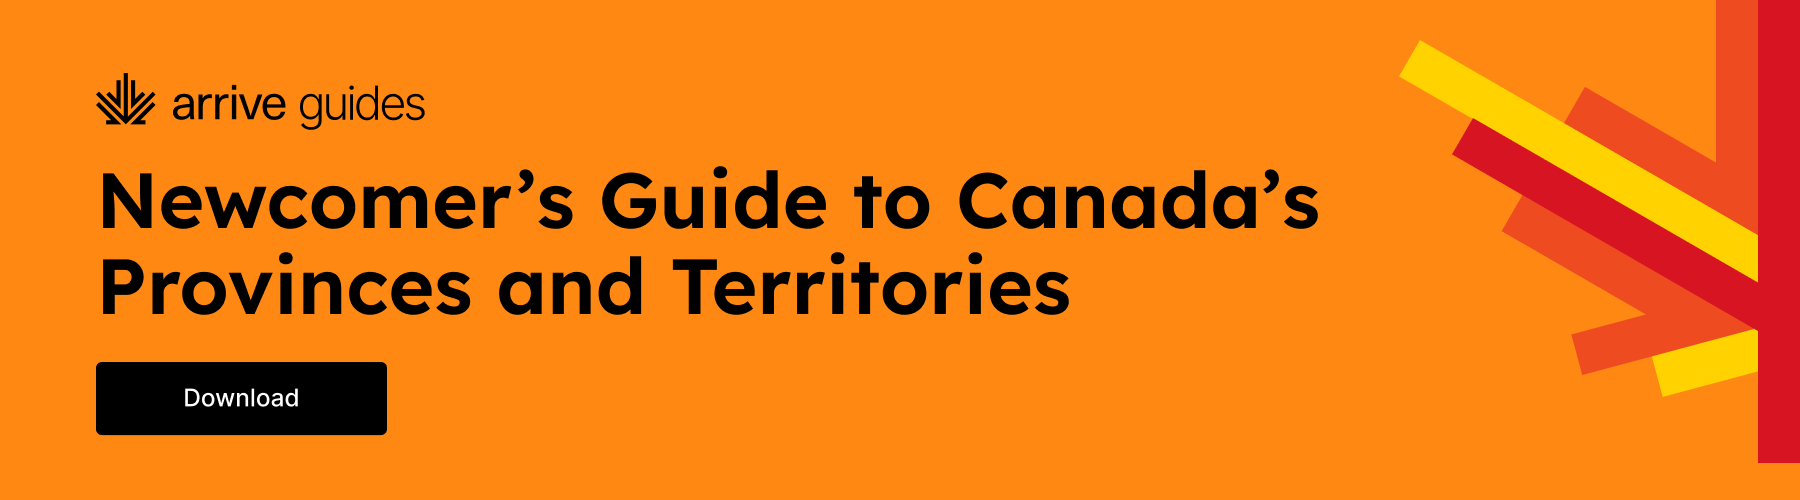 Guide to Canada's provinces and territories